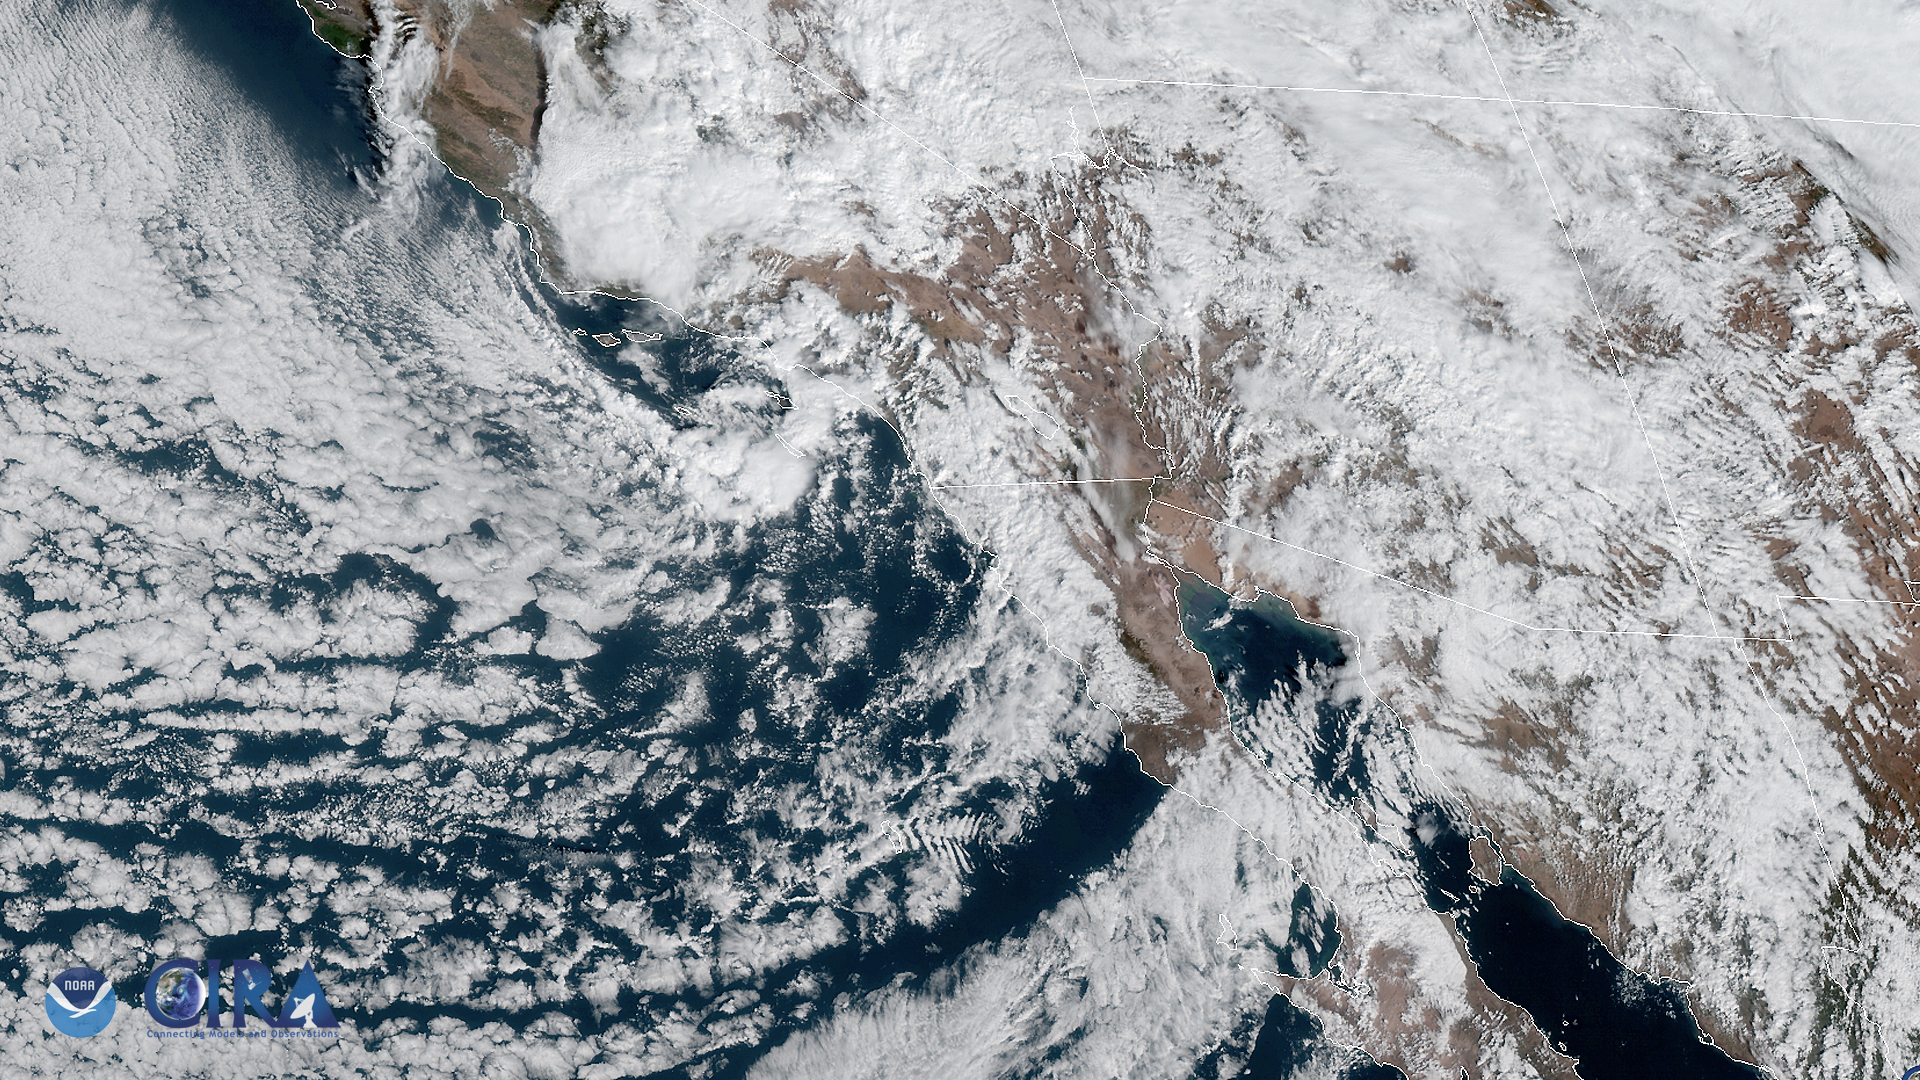 Storm System from the Pacific Ocean Brings Rough Weather to Southern Arizona